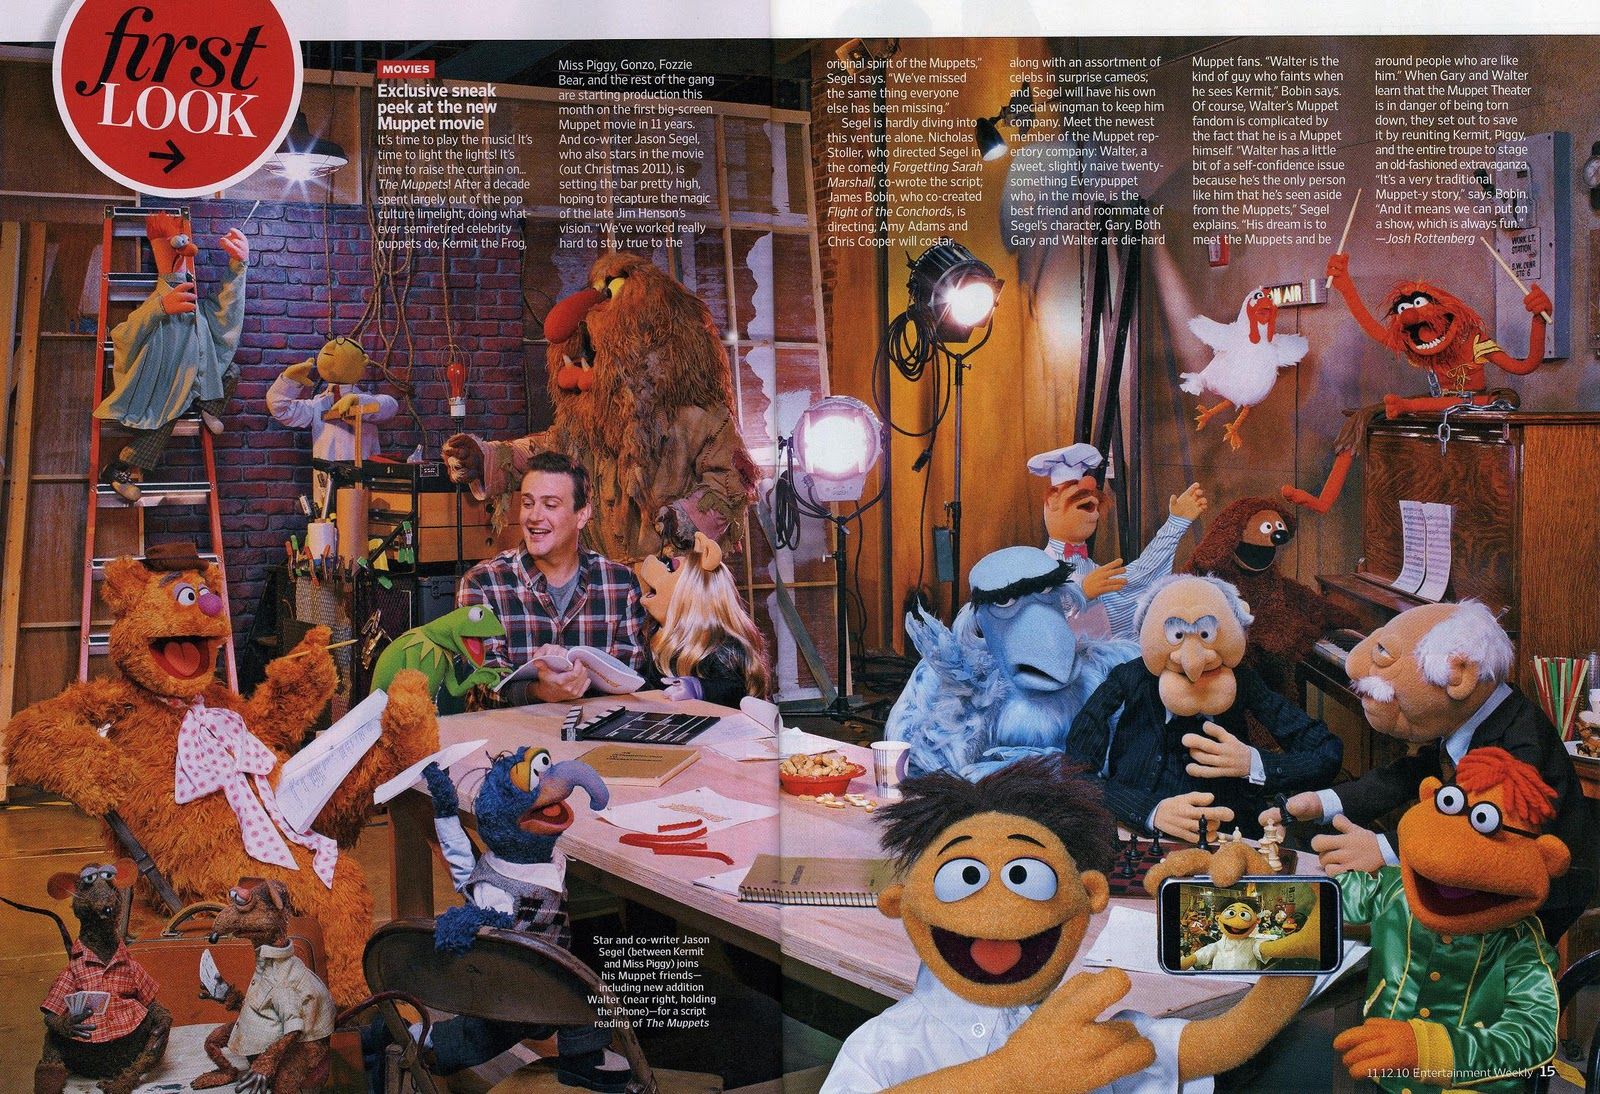 The Muppets Image #2